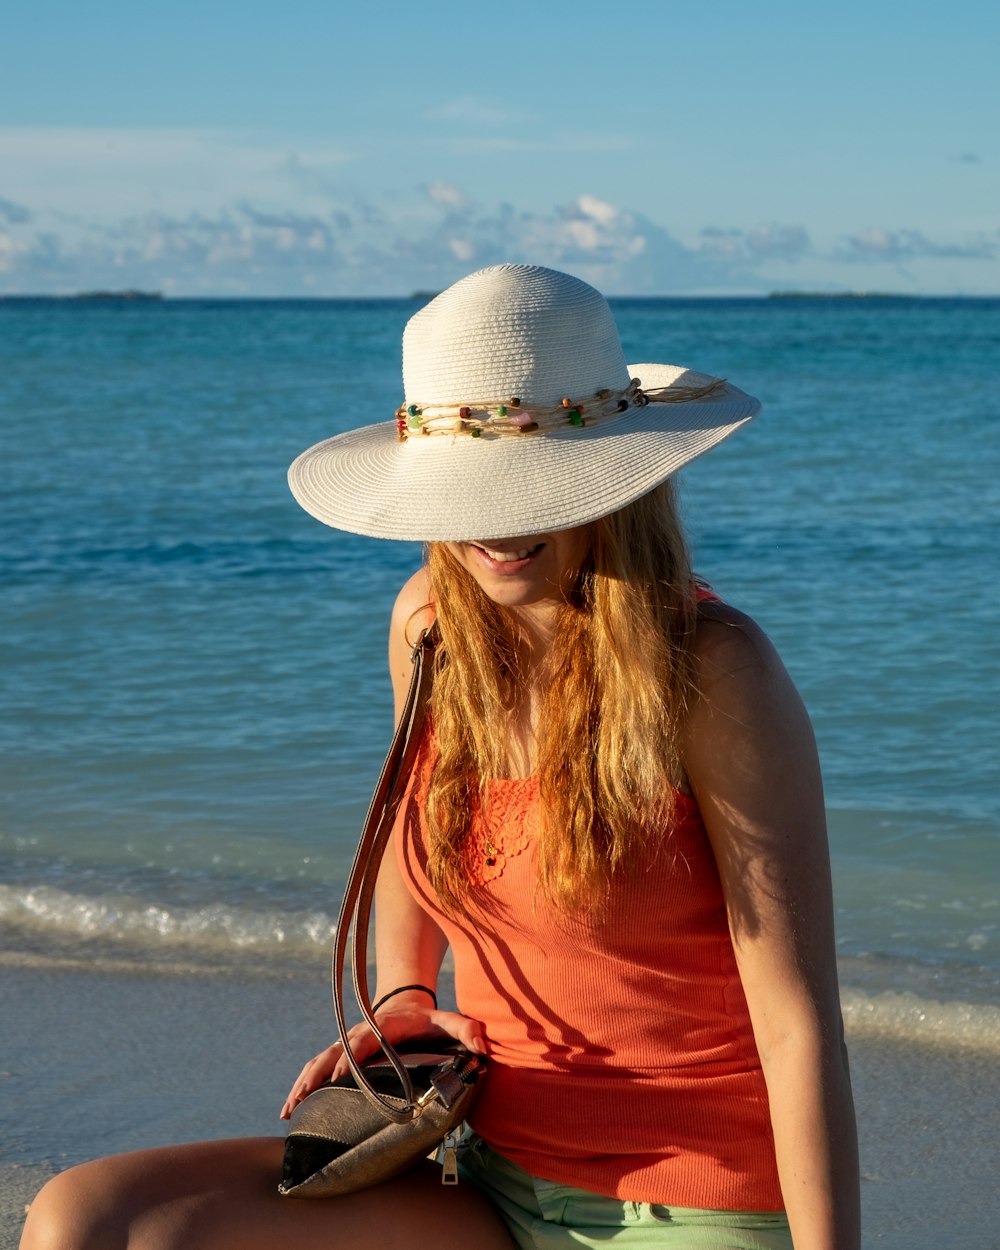 woman in red tank top wearing white sun hat standing on beach during daytime